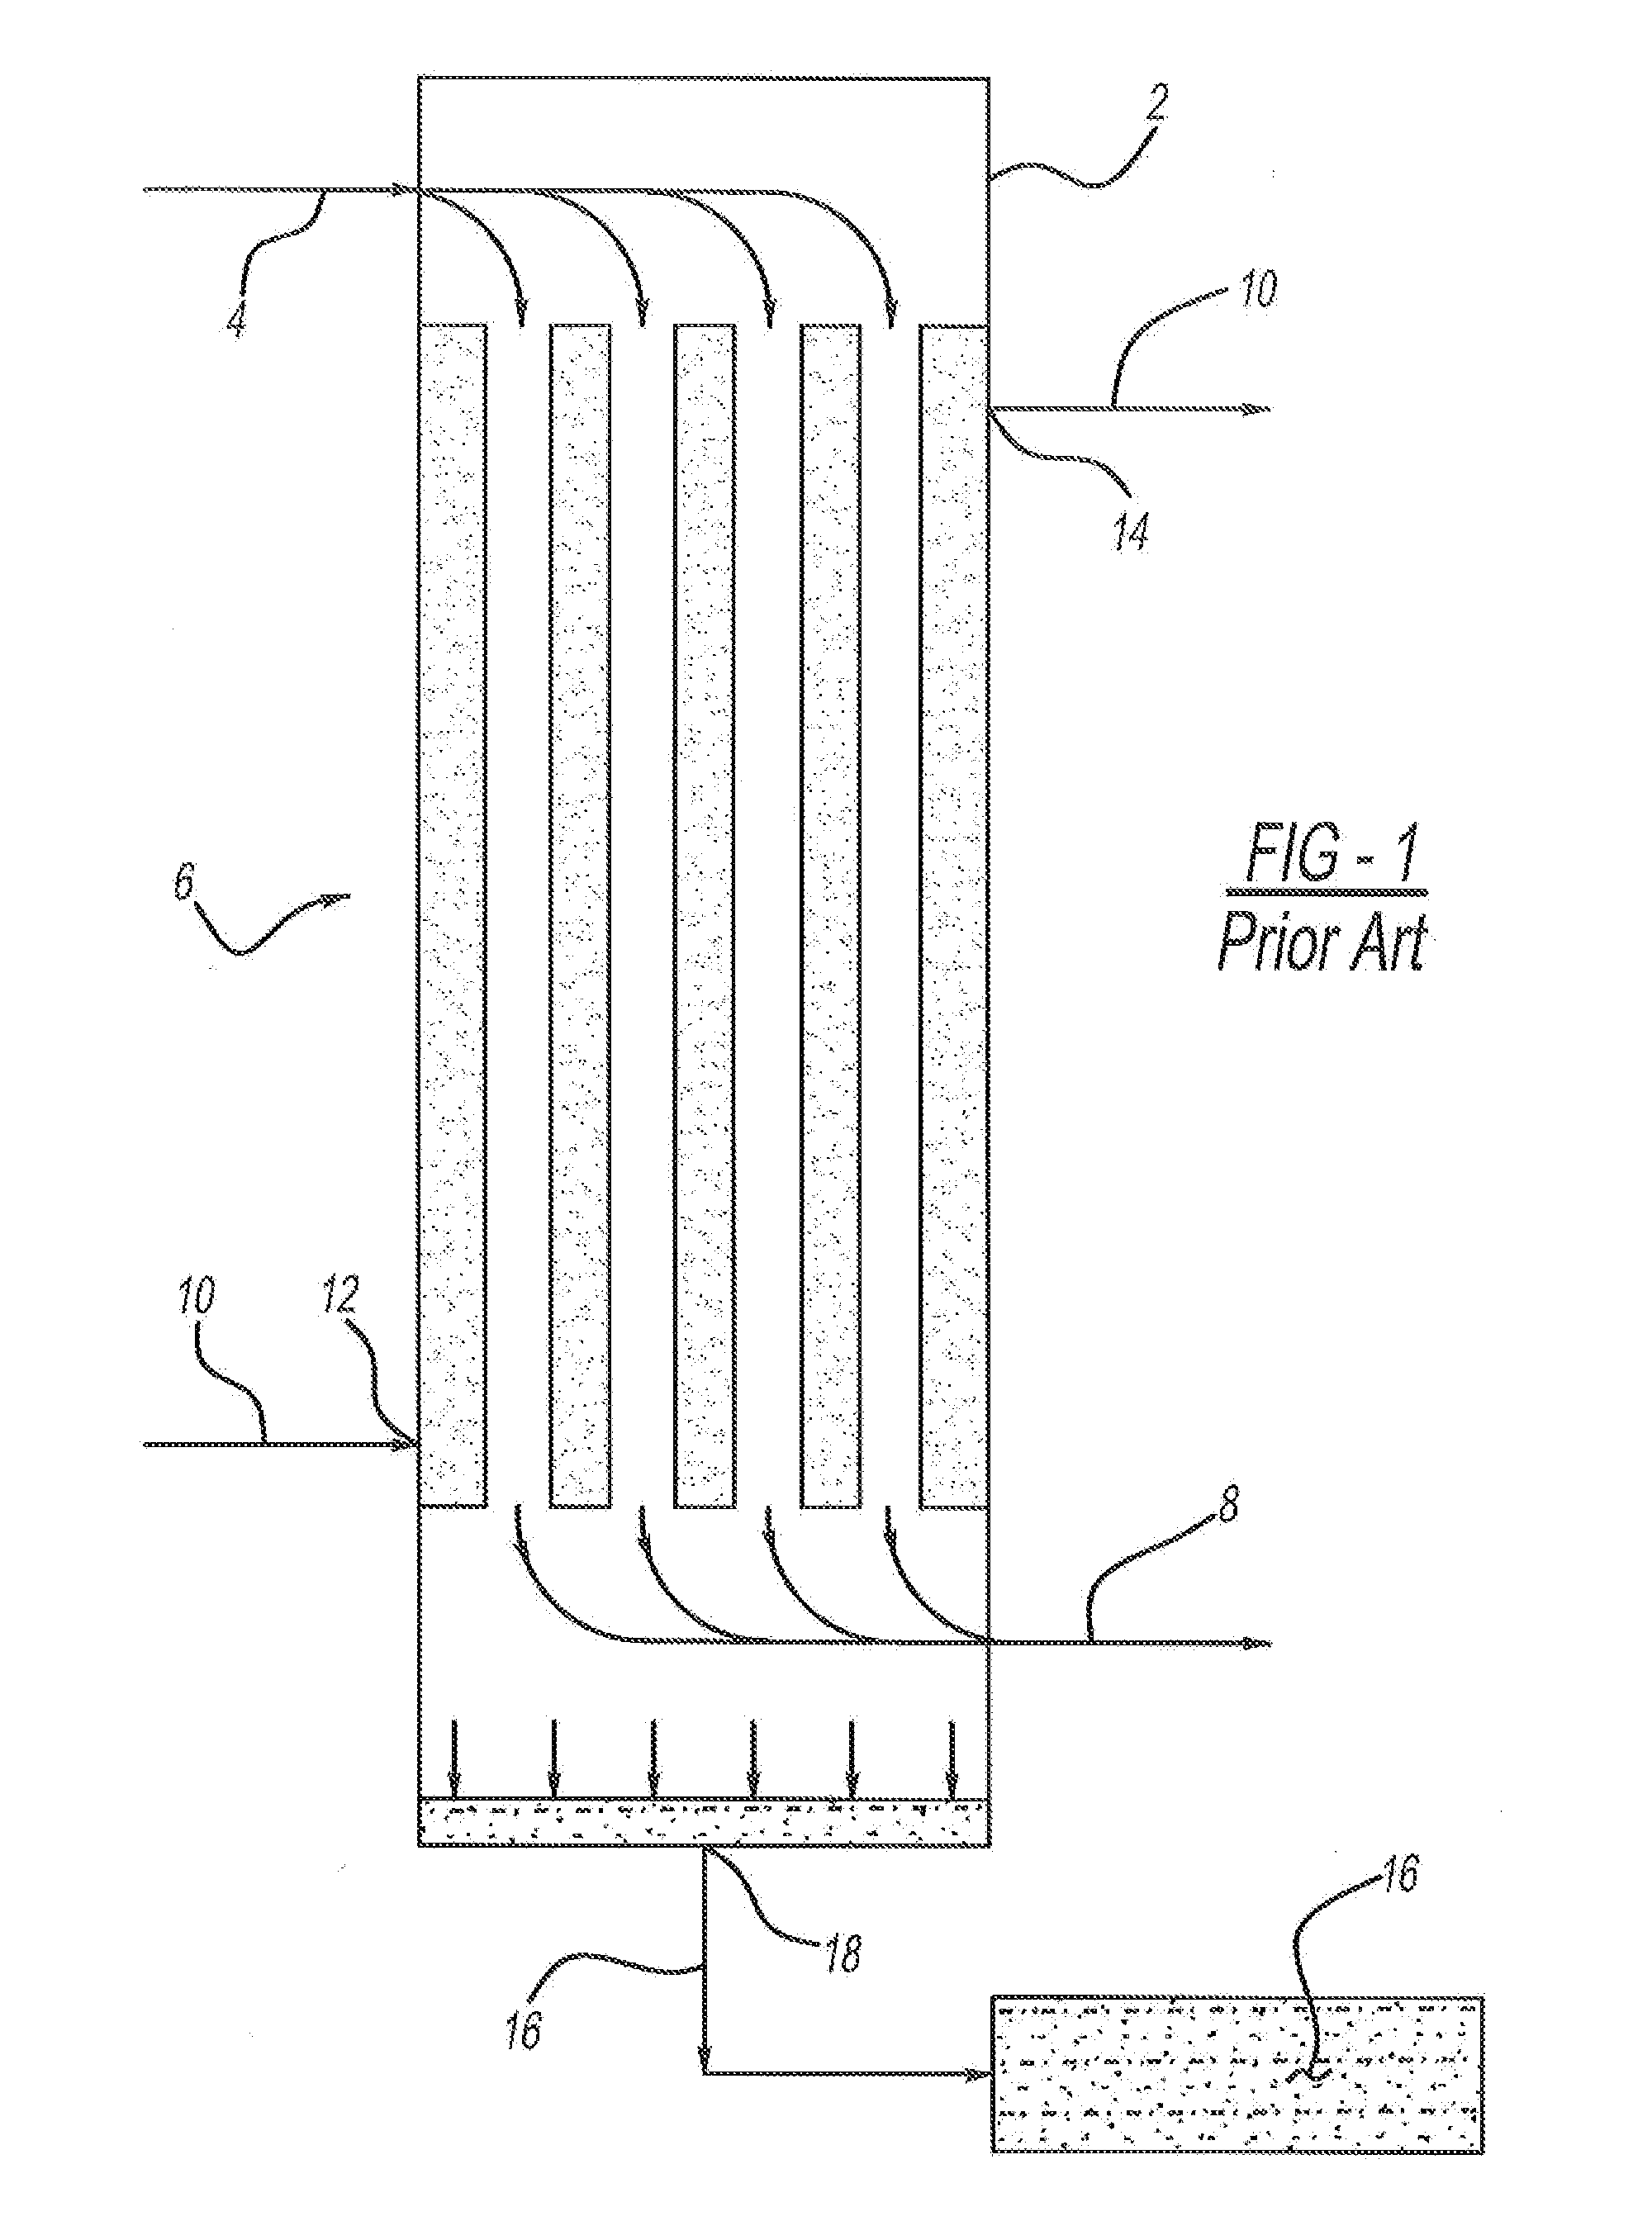 Apparatus for in-situ production of low dissolved hydrogen sulfide, degassed, sulfur from claus sulfur recovery